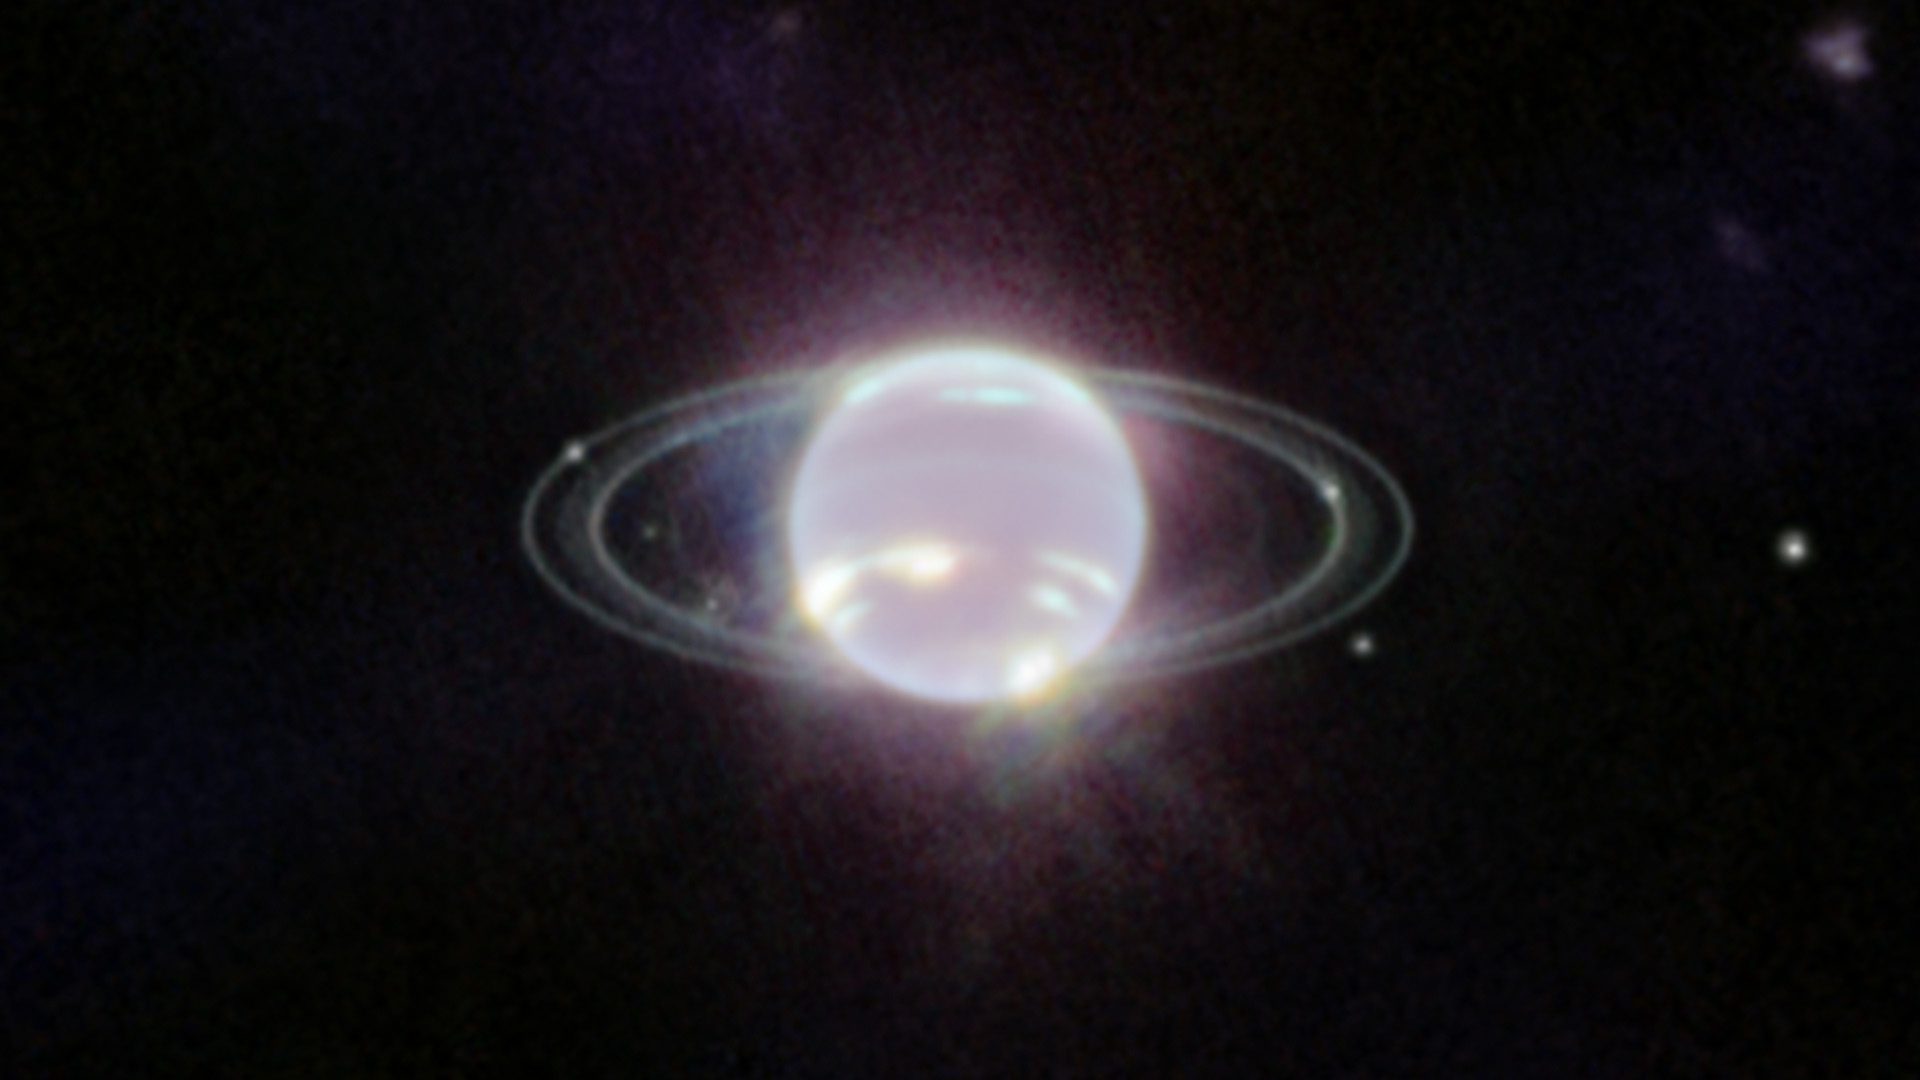 Neptune and its rings as captured by the James Webb Space Telescope